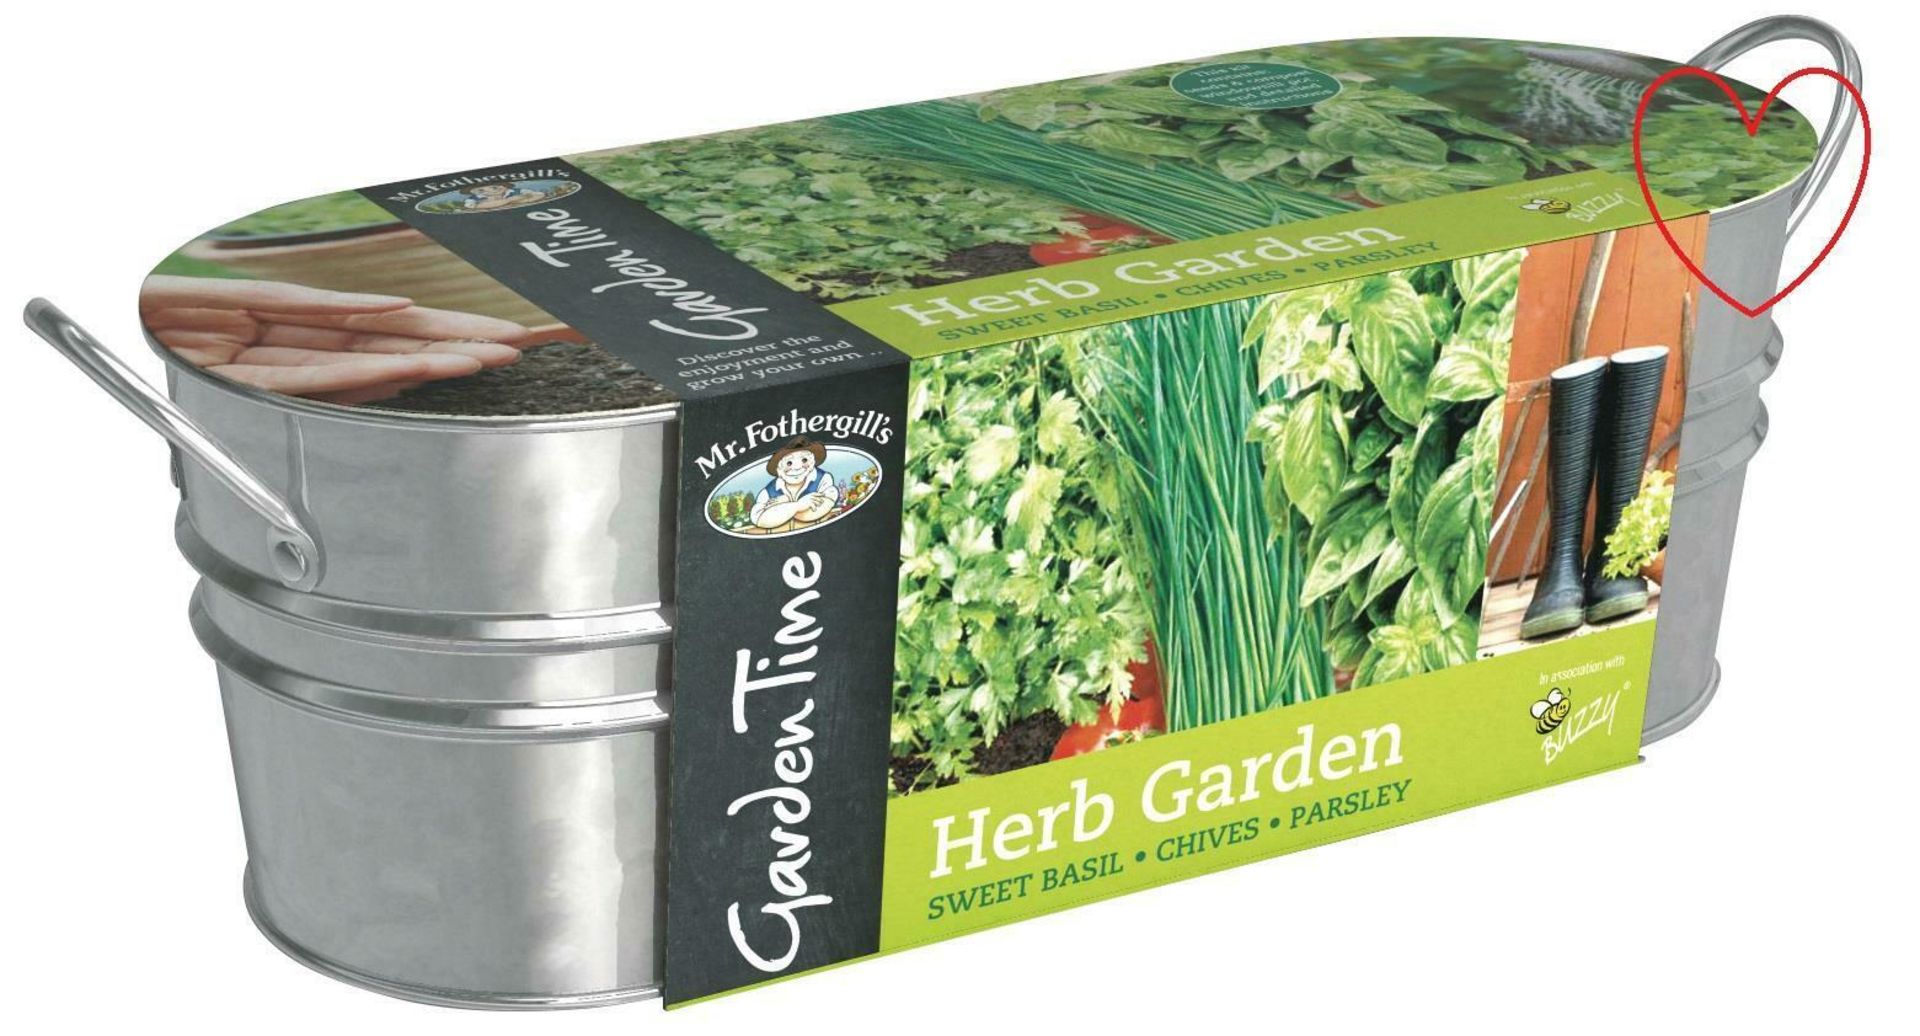 New Mr Fothergills Herb Garden Growing Kit - Sweet Basil, Chives & Parsley - Image 2 of 2